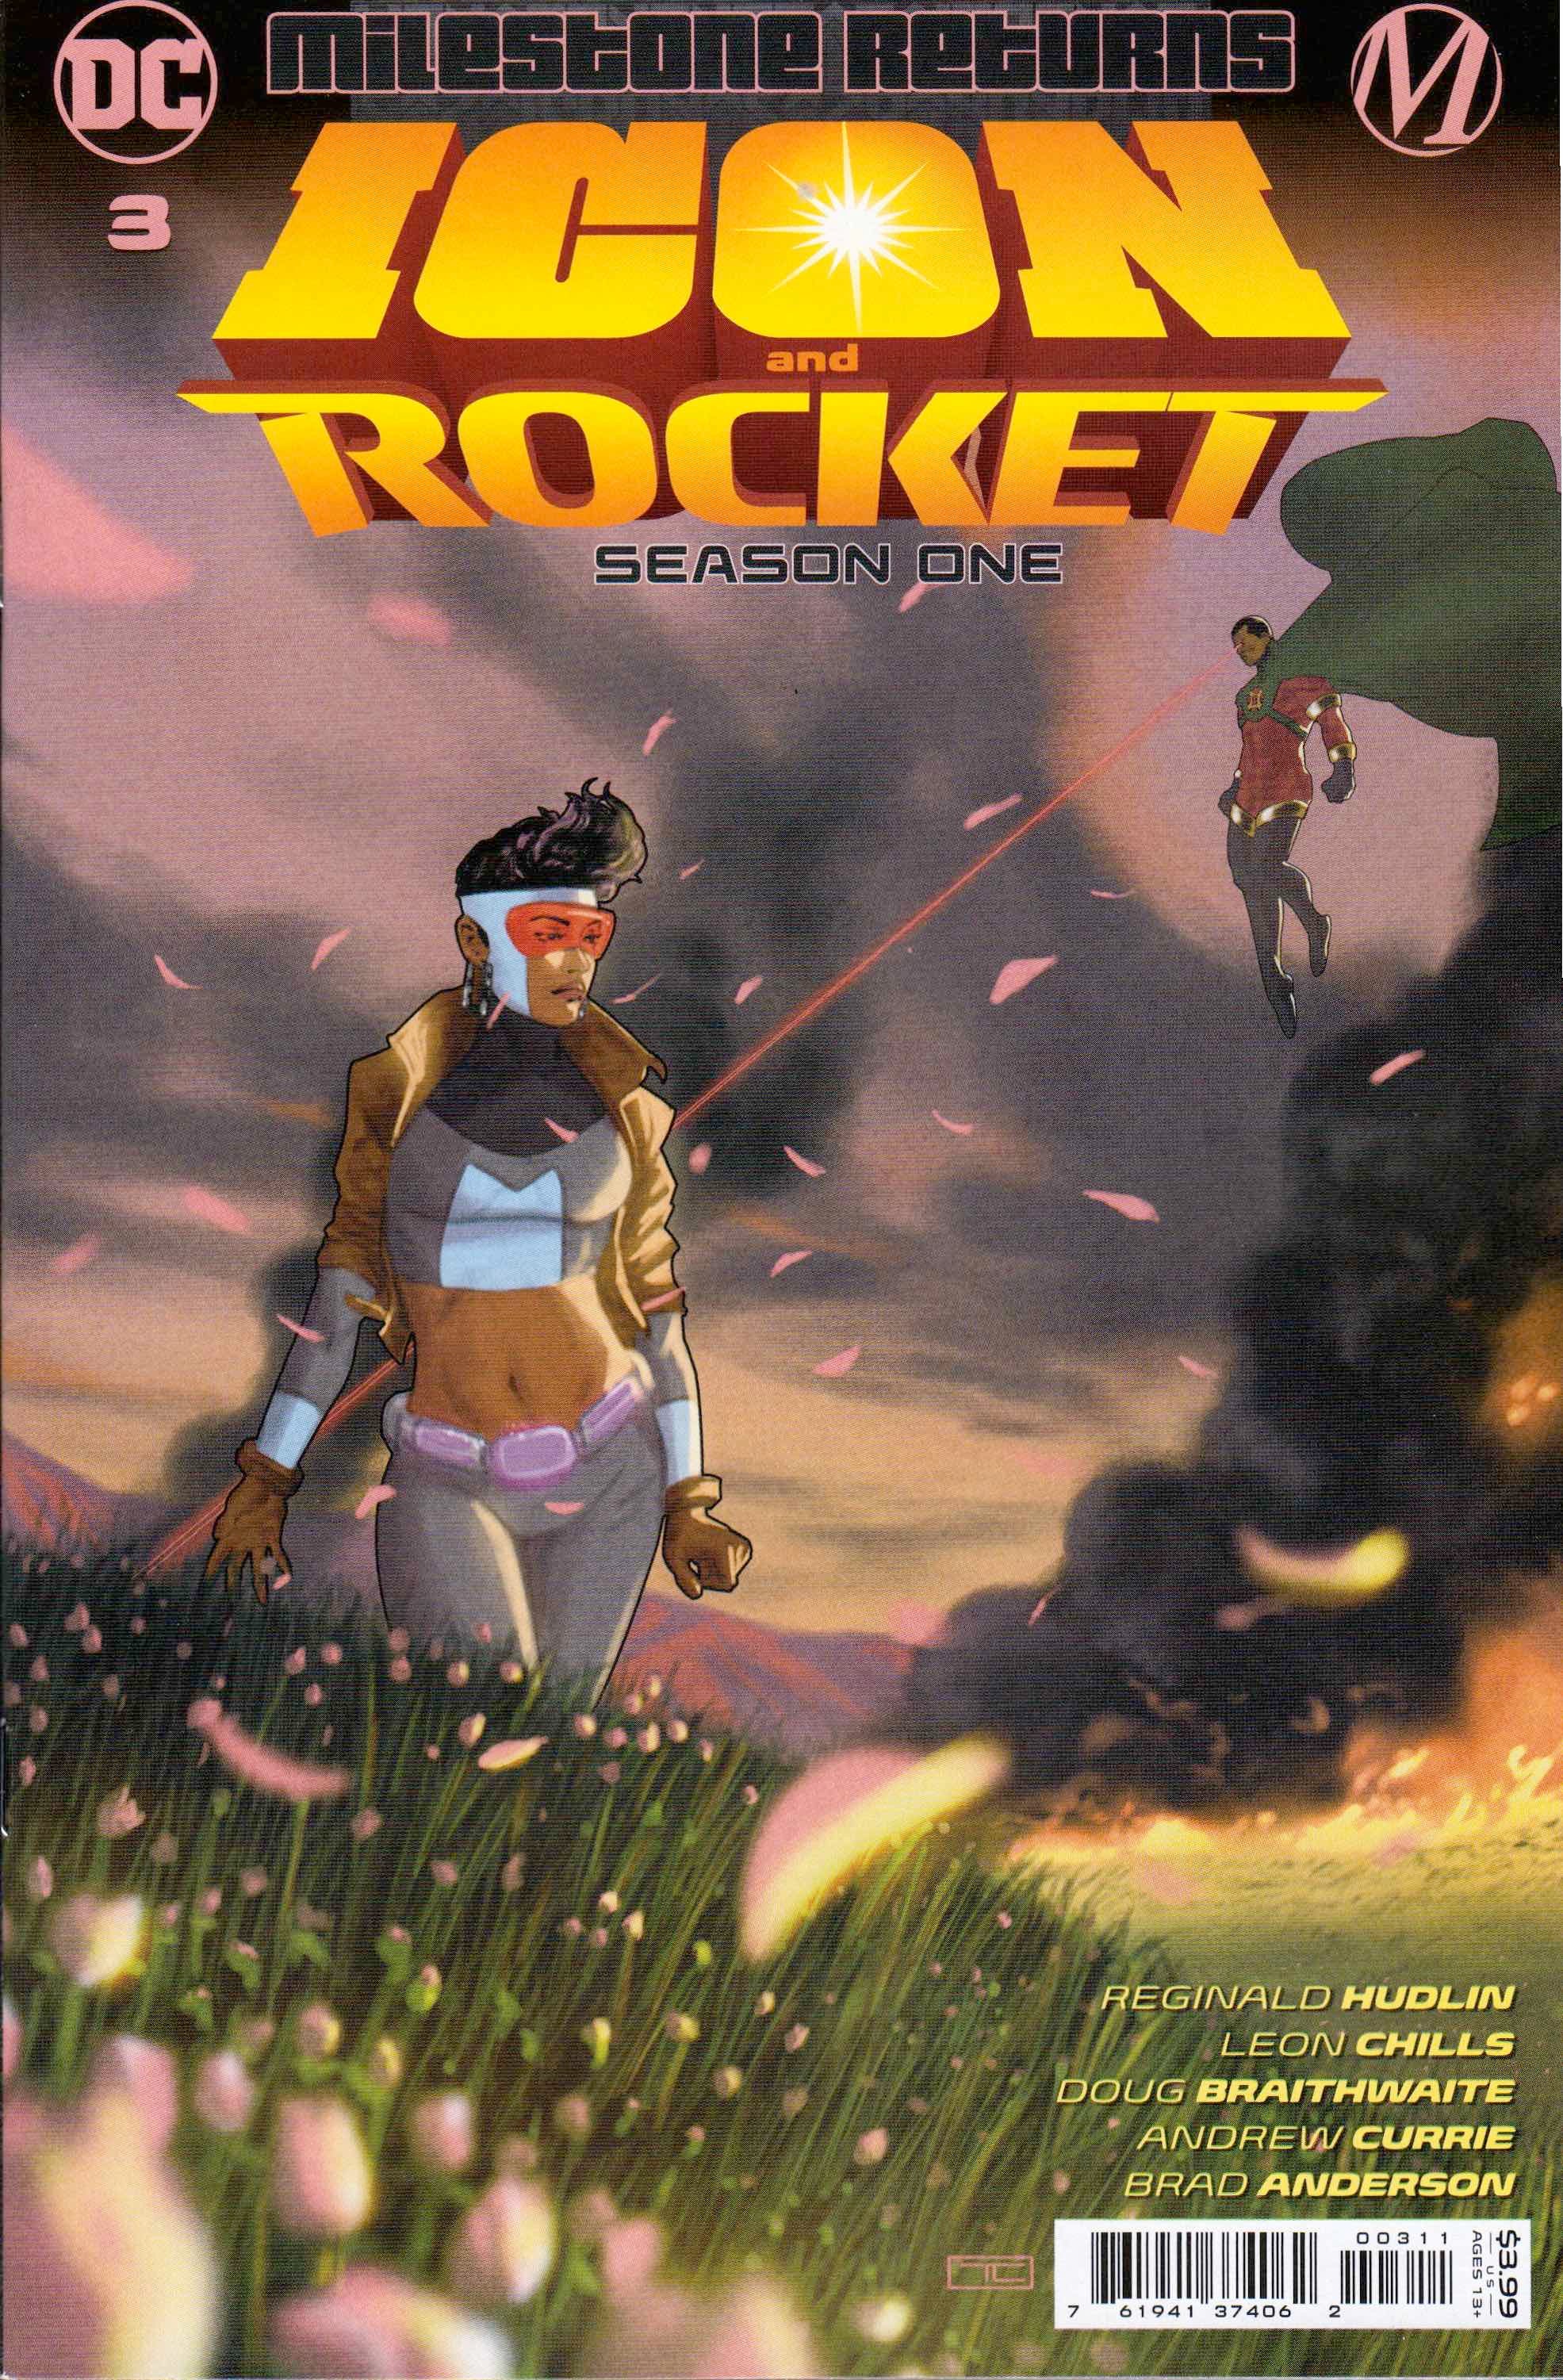 Icon & Rocket Season One #3 (Of 6) Cvr A Taurin Clarke - State of Comics